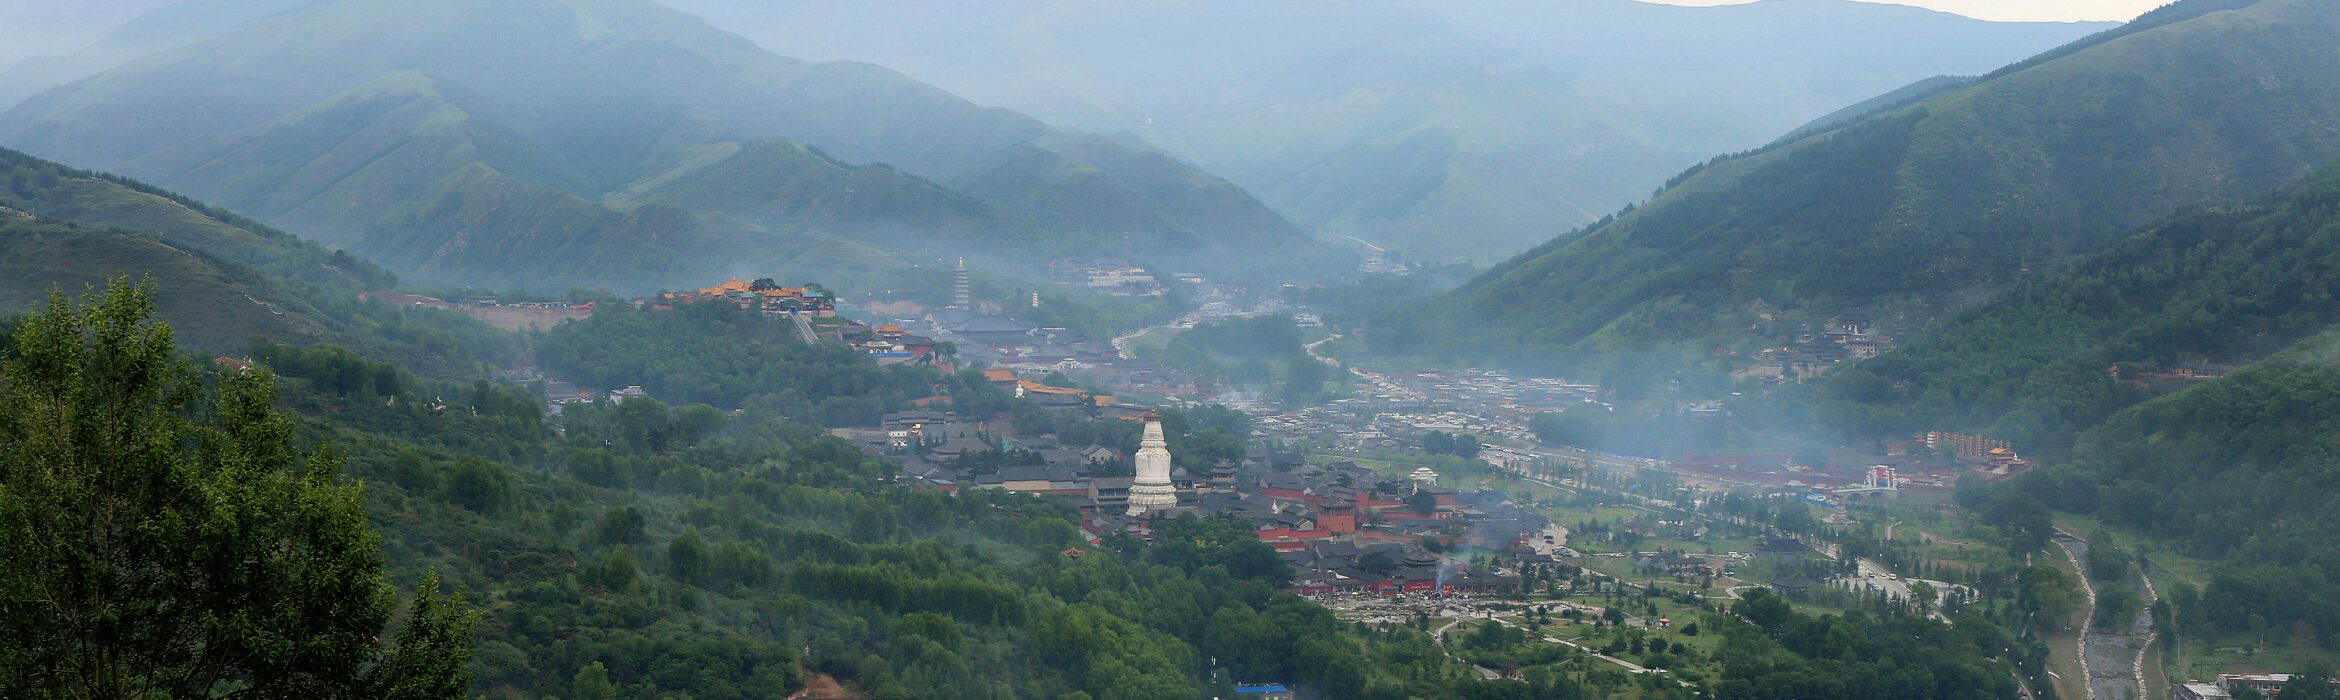 An International and Intensive Program on Buddhism and East Asian Religions at Mount Wutai